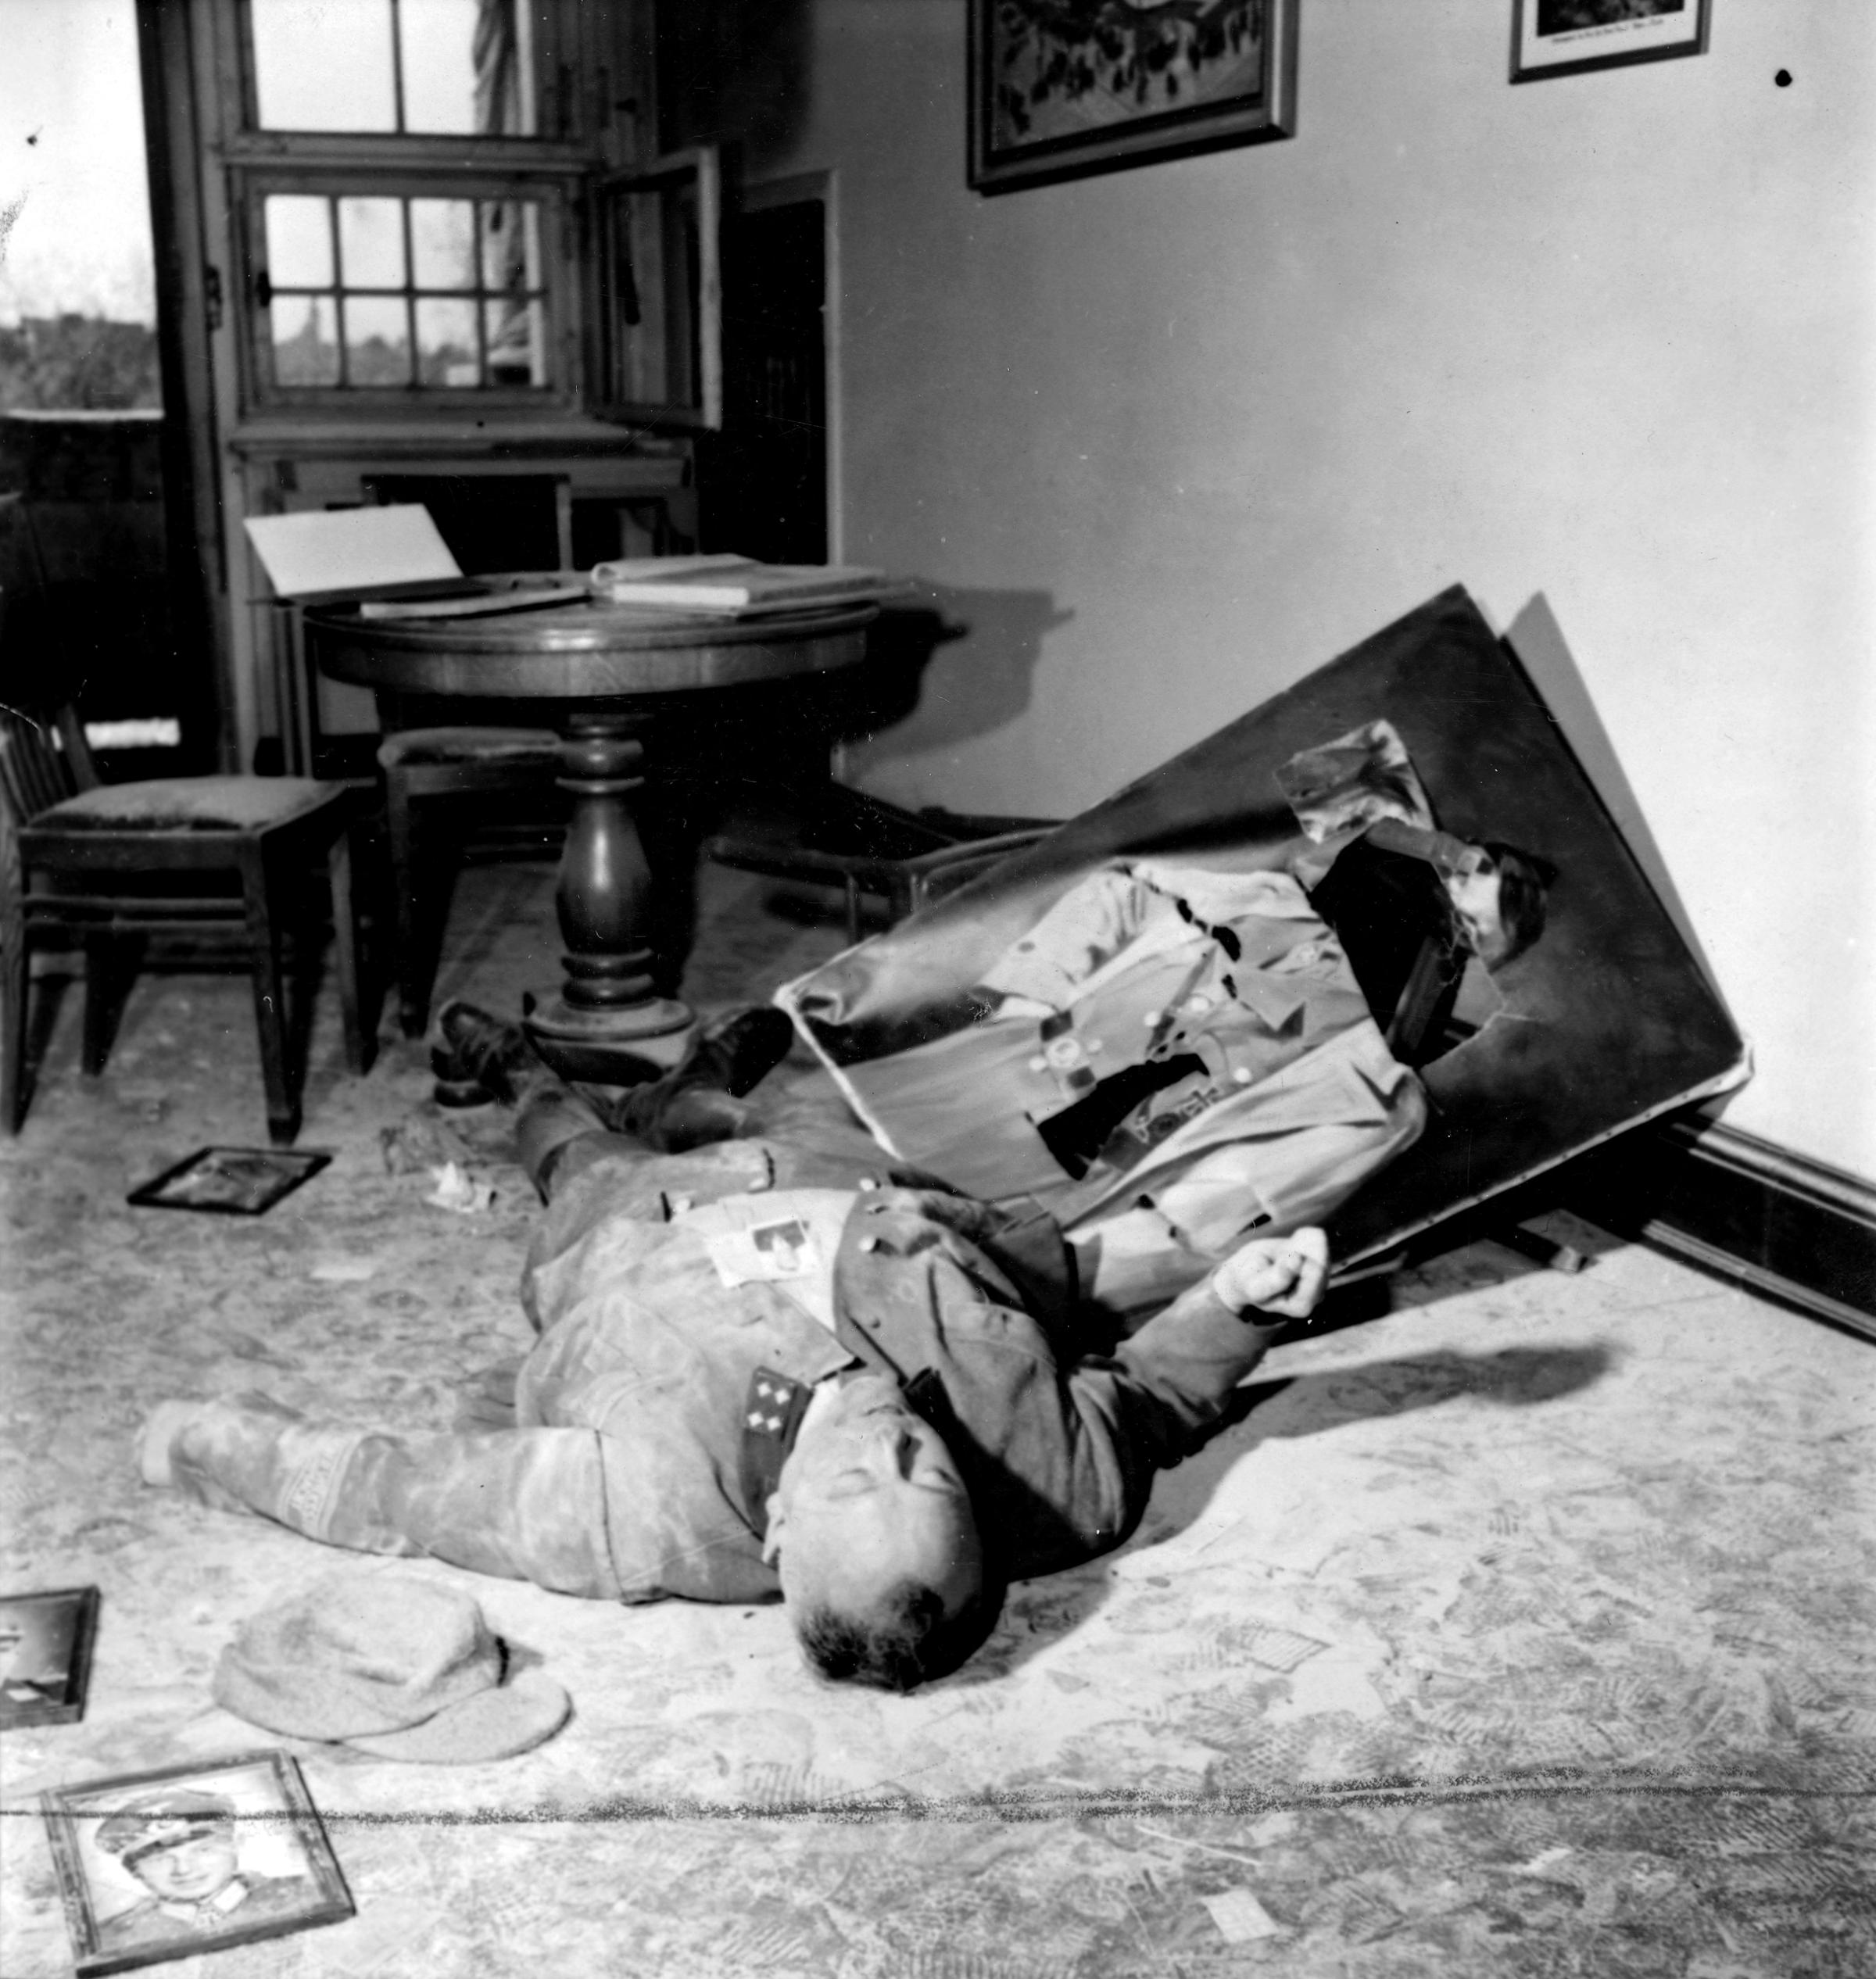 Commanding officer of City Volksturm lying dead next to a slashed picture of Hitler after committing suicide in small room at City Council Office after victorious American soldiers enter the city.